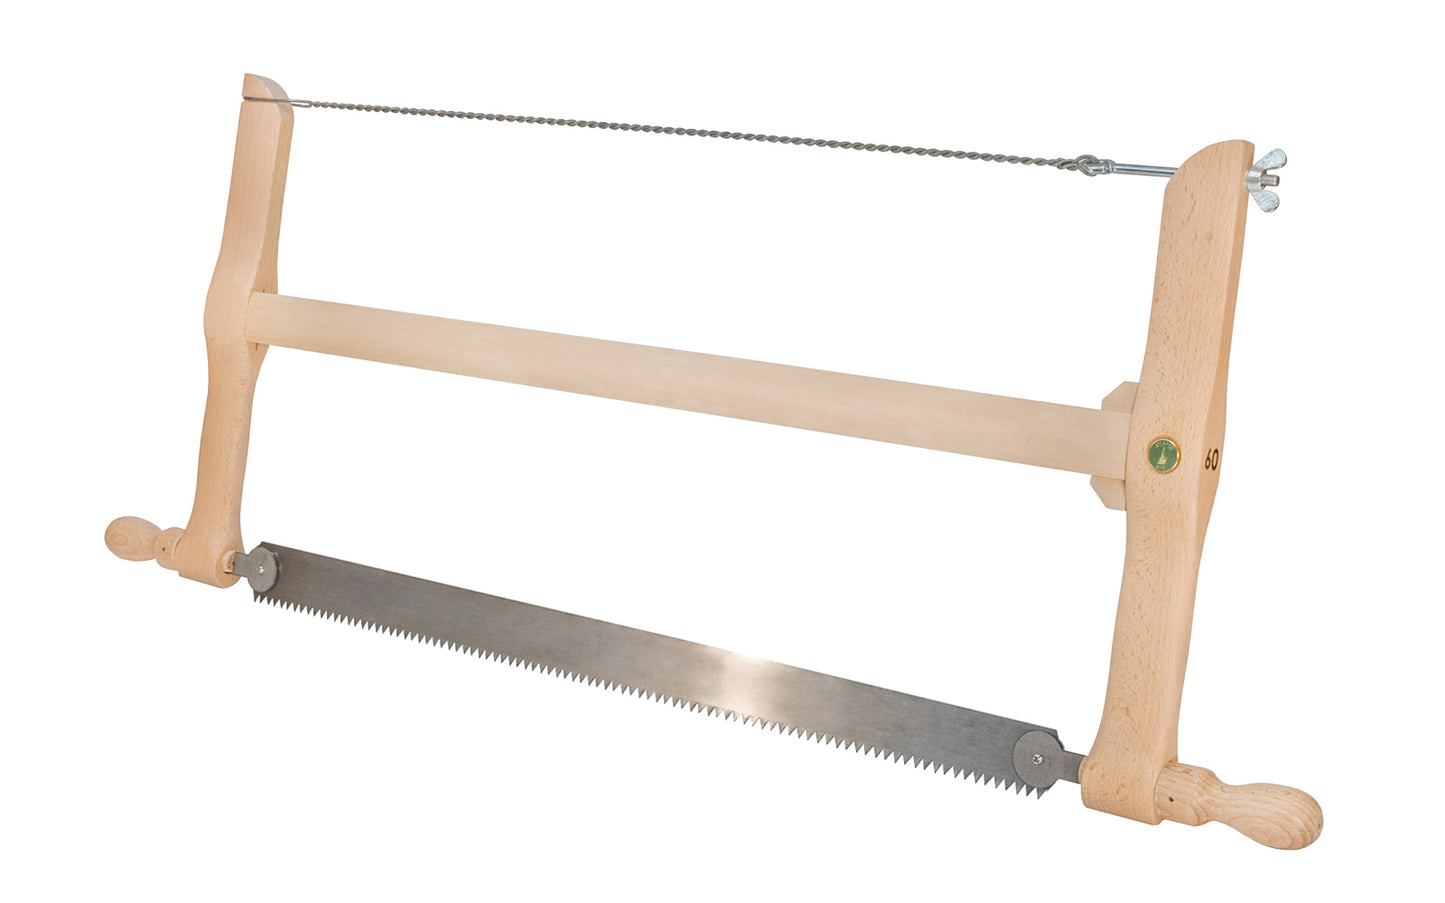 Made in Germany · Model No. 270-600 ~ "Farmer's Saw" made by Ulmia in Germany. Large saw teeth with marked push & pull-to-cut orientation for coarse cuts. This web saw is particularly suited for cutting boards, square-edged timber, round wood & firewood - 4044637102108 - 6 TPI - 600 mm blade - Web Saw - Set & sharpened - Coarse, Fast Cutting Blade  - Pull & Push-to-Cut